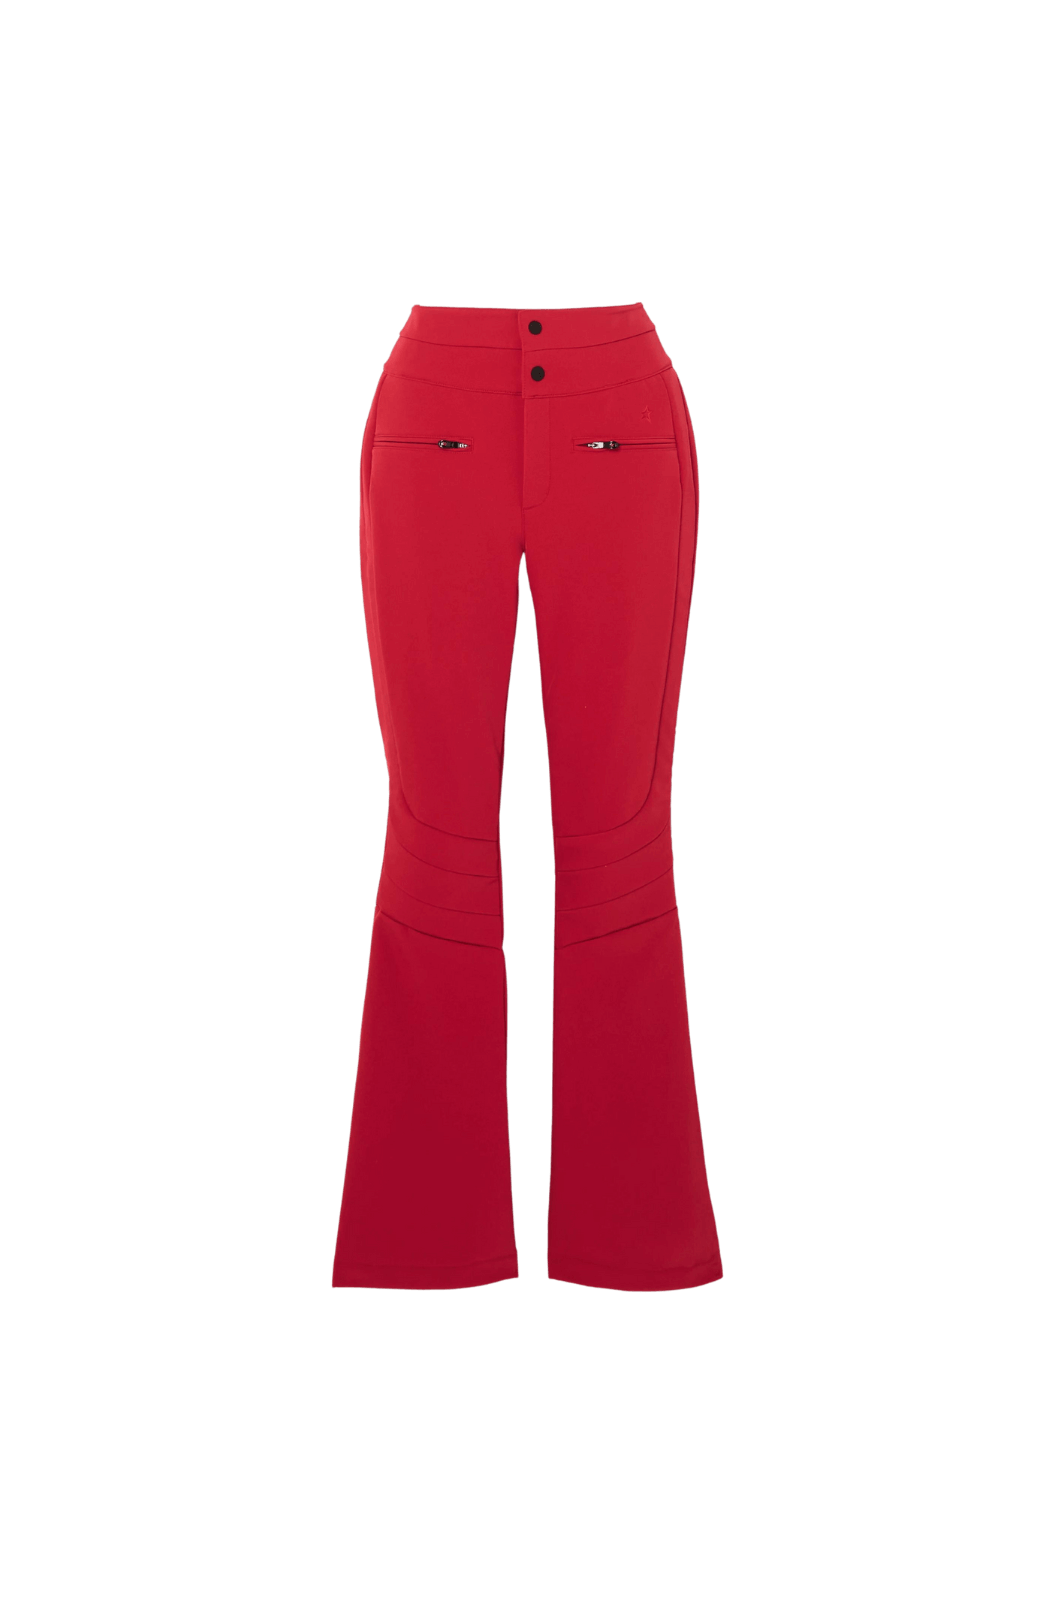 Perfect Moment Aurora Ski Trousers in Red with popper buttons and a high waist